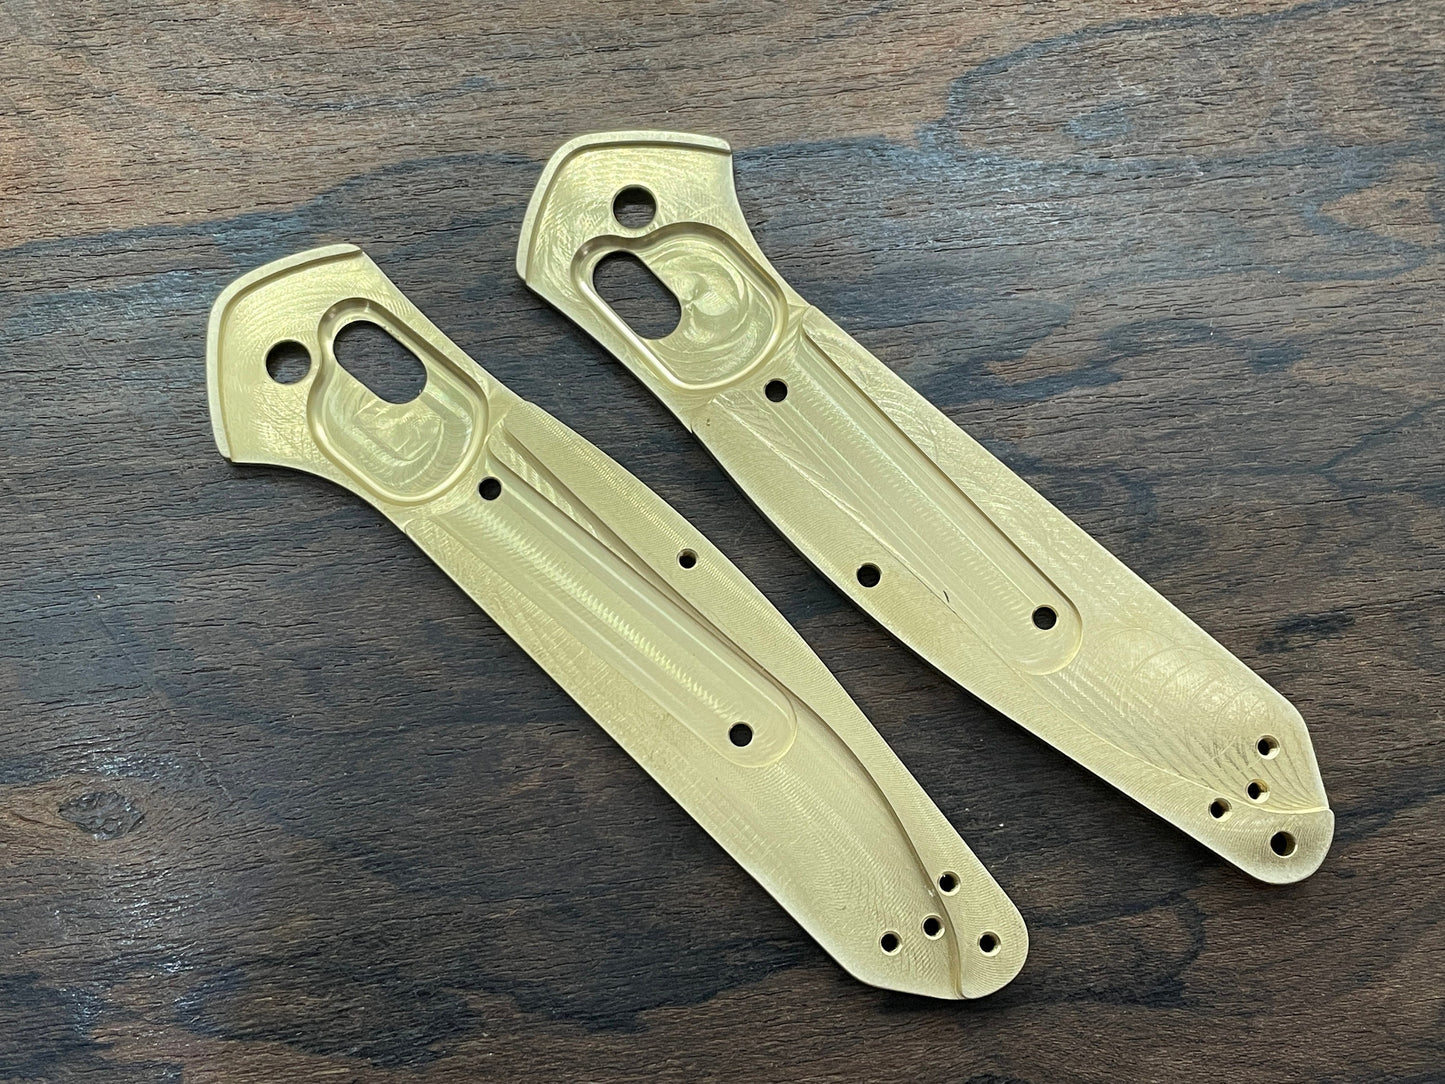 CIRCUIT BOARD engraved Brass Scales for Benchmade 940 Osborne